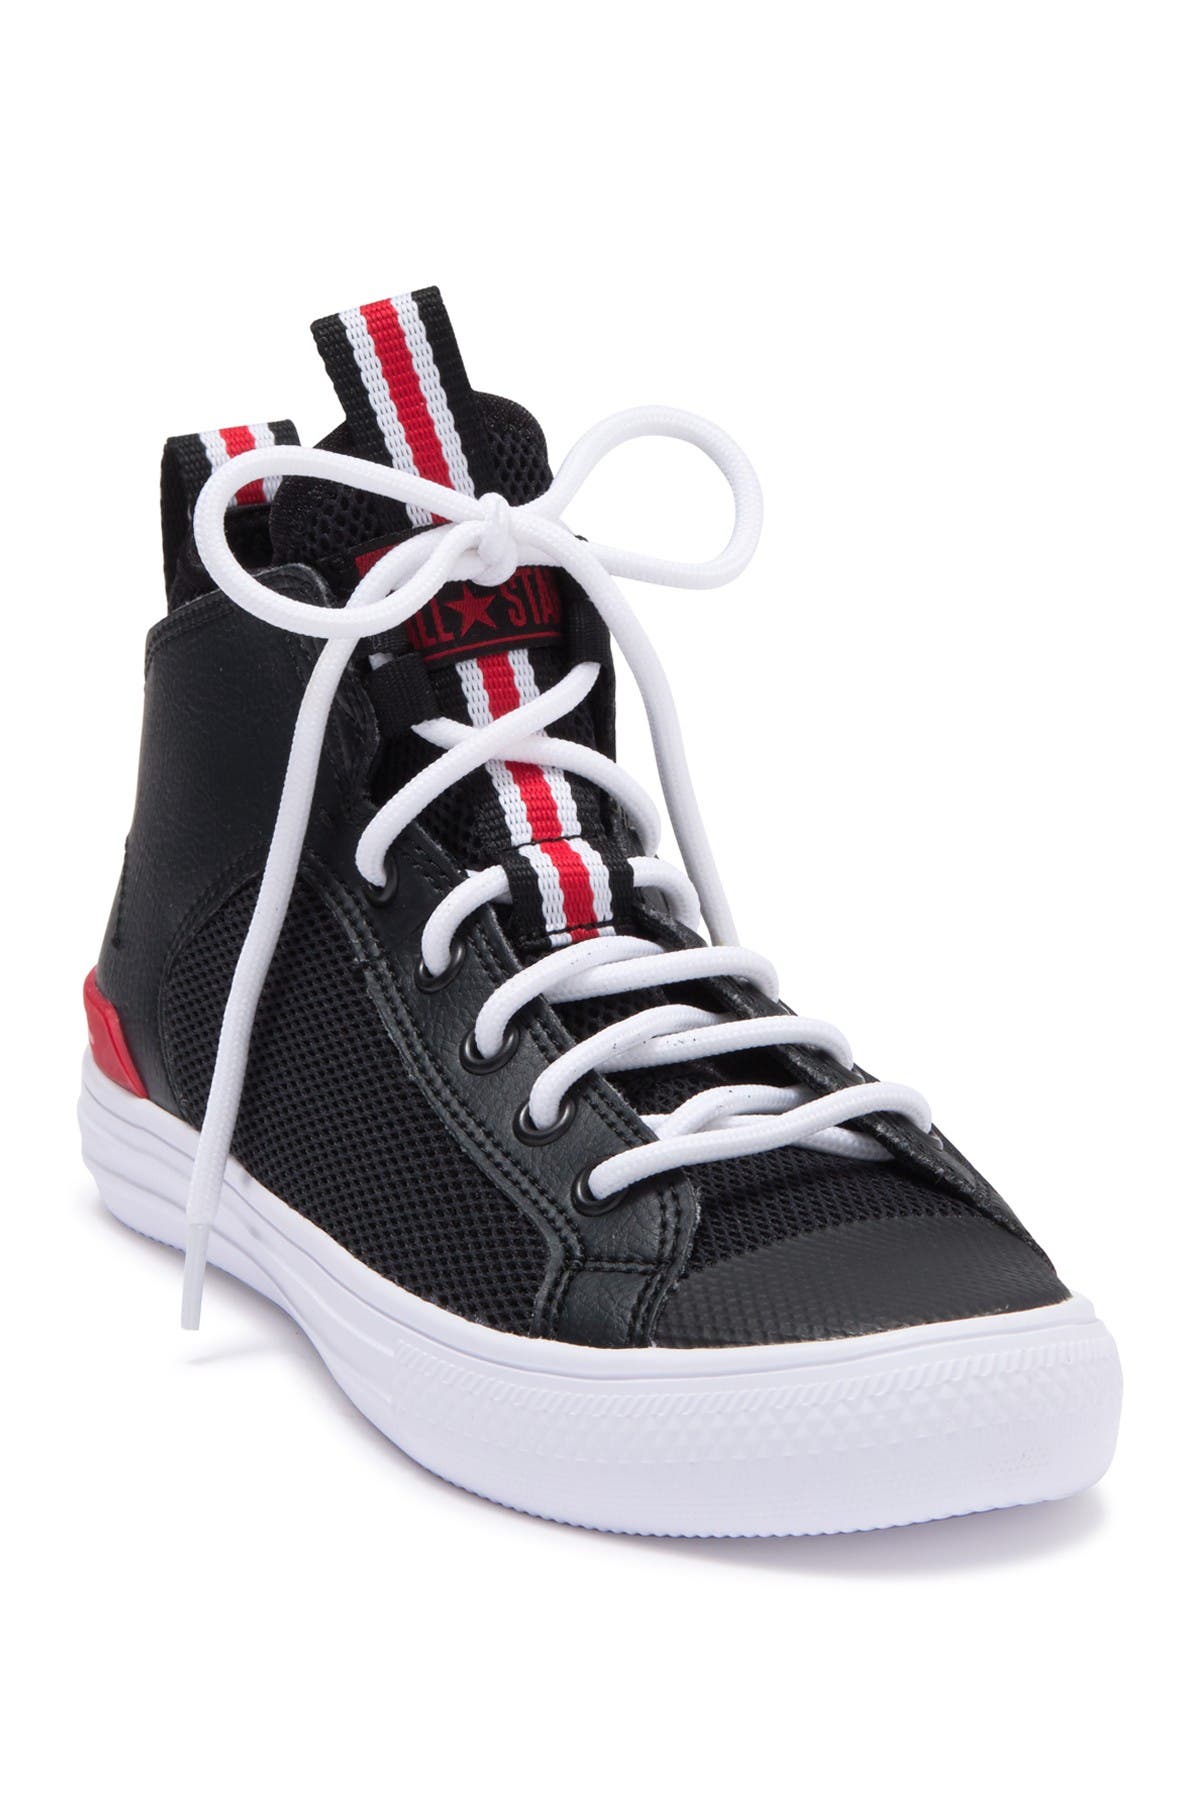 chuck taylor all star ultra mid sneakers